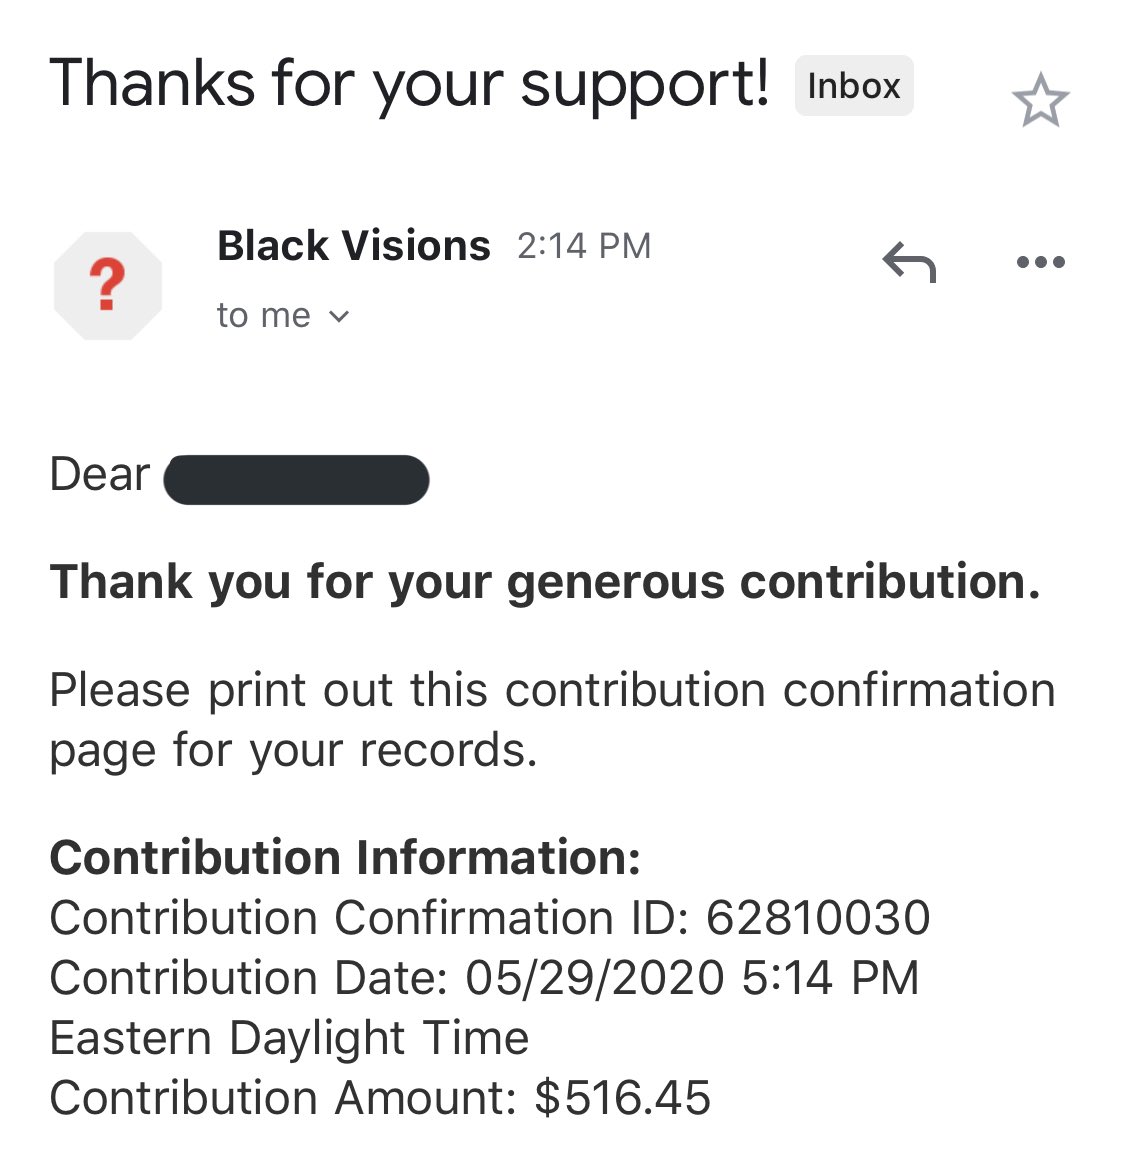 I’m recuperating for a bit, plus I guess I need to put on a shirt for this video call in a minute. In the meantime,  @BlackVisionsMN is another good org to donate to